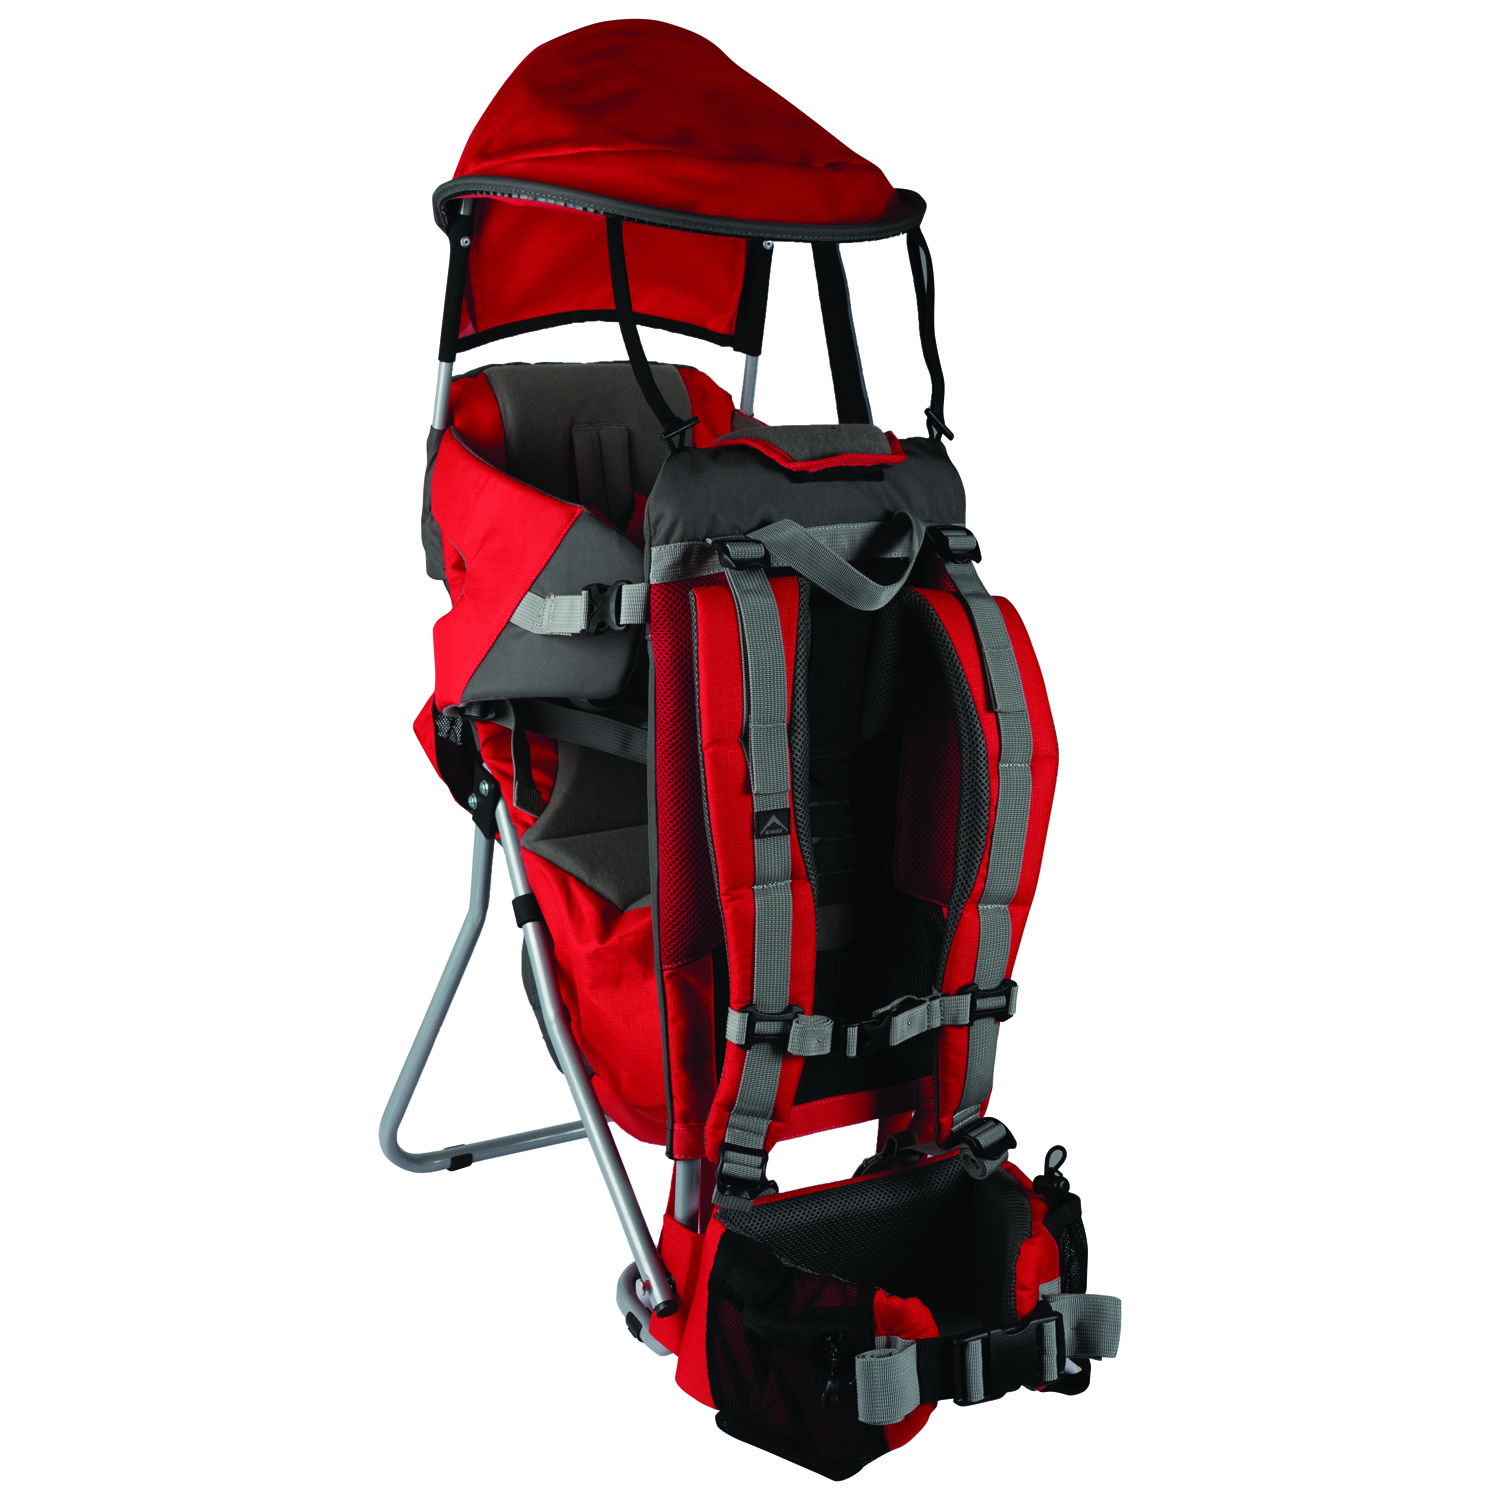 recommended baby strollers